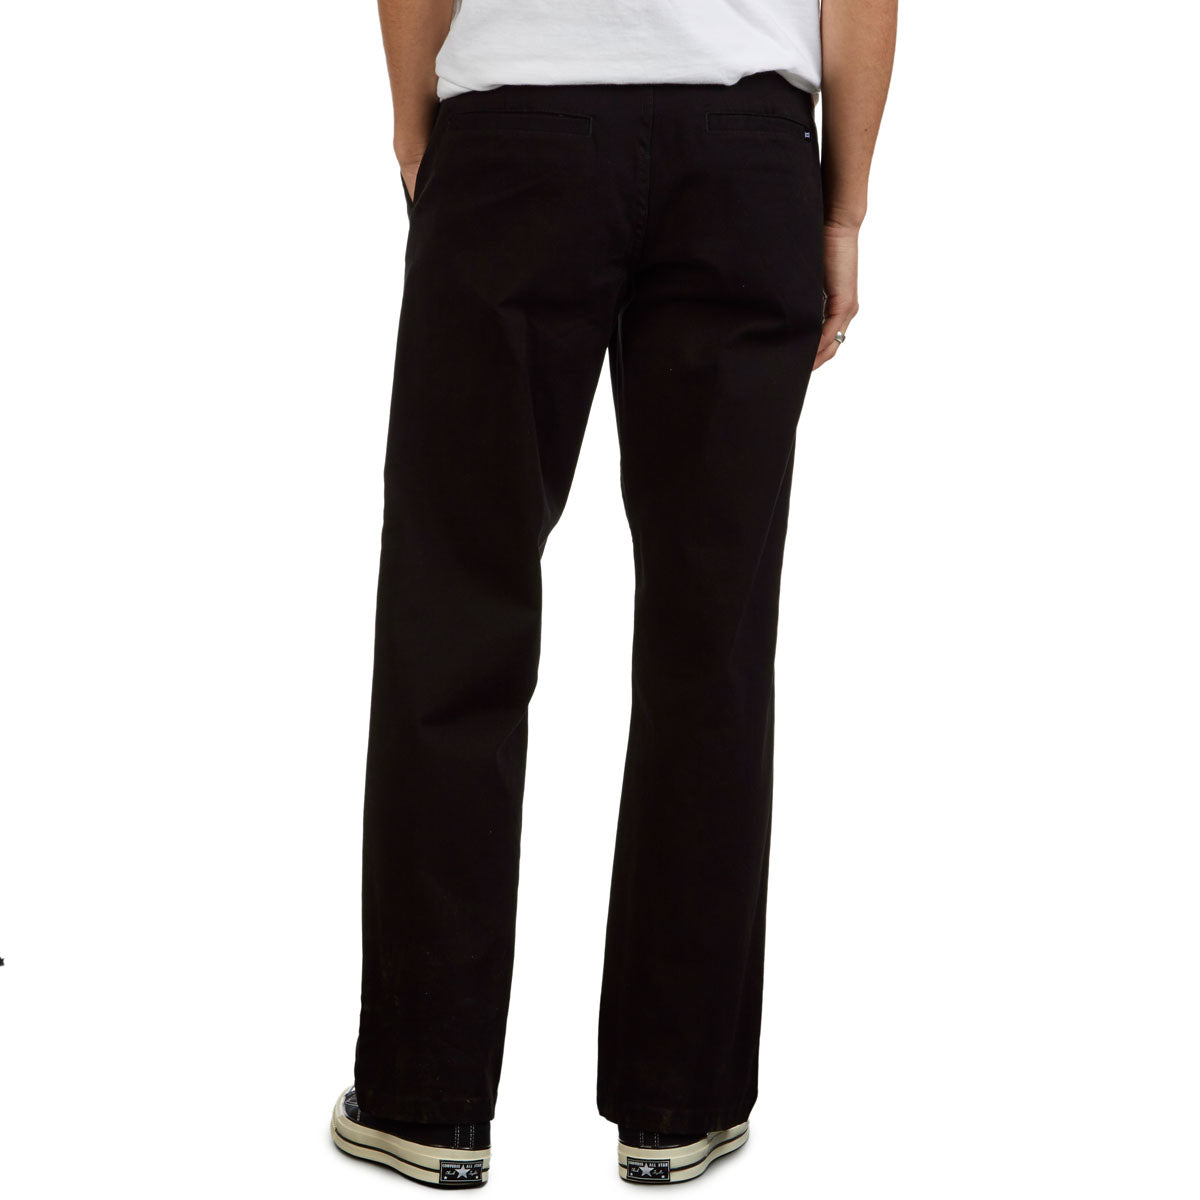 CCS Standard Plus Relaxed Chino Pants - Black image 3